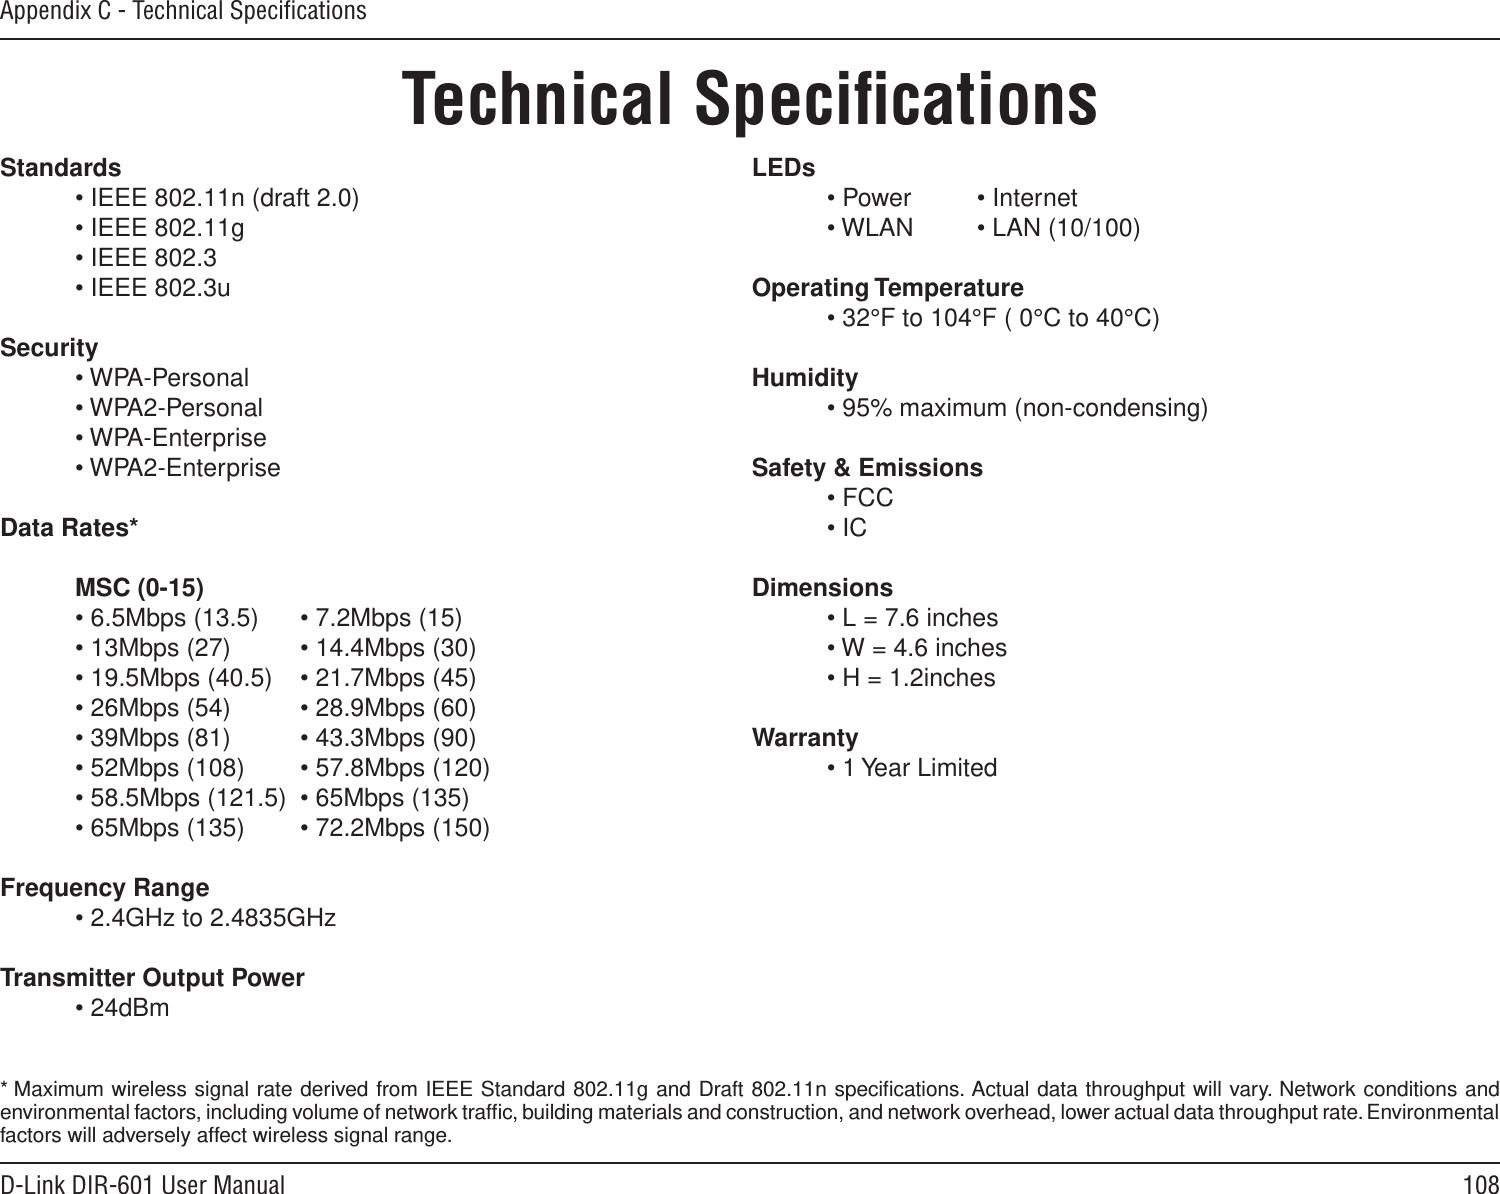 108D-Link DIR-601 User ManualAppendix C - Technical SpeciﬁcationsTechnical SpeciﬁcationsStandards  • IEEE 802.11n (draft 2.0)   • IEEE 802.11g  • IEEE 802.3  • IEEE 802.3uSecurity  • WPA-Personal  • WPA2-Personal  • WPA-Enterprise  • WPA2-EnterpriseData Rates* MSC (0-15)  • 6.5Mbps (13.5)  • 7.2Mbps (15)  • 13Mbps (27)  • 14.4Mbps (30)  • 19.5Mbps (40.5)  • 21.7Mbps (45)  • 26Mbps (54)  • 28.9Mbps (60)  • 39Mbps (81)  • 43.3Mbps (90)  • 52Mbps (108)  • 57.8Mbps (120)   • 58.5Mbps (121.5)  • 65Mbps (135)  • 65Mbps (135)  • 72.2Mbps (150) Frequency Range  • 2.4GHz to 2.4835GHzTransmitter Output Power  • 24dBmLEDs  • Power   • Internet     • WLAN   • LAN (10/100)   Operating Temperature  • 32°F to 104°F ( 0°C to 40°C)Humidity  • 95% maximum (non-condensing)Safety &amp; Emissions  • FCC  • IC Dimensions  • L = 7.6 inches  • W = 4.6 inches  • H = 1.2inchesWarranty  • 1 Year Limited*  Maximum wireless signal rate derived from IEEE Standard 802.11g and Draft 802.11n speciﬁcations. Actual data throughput will vary. Network conditions and environmental factors, including volume of network trafﬁc, building materials and construction, and network overhead, lower actual data throughput rate. Environmental factors will adversely affect wireless signal range.